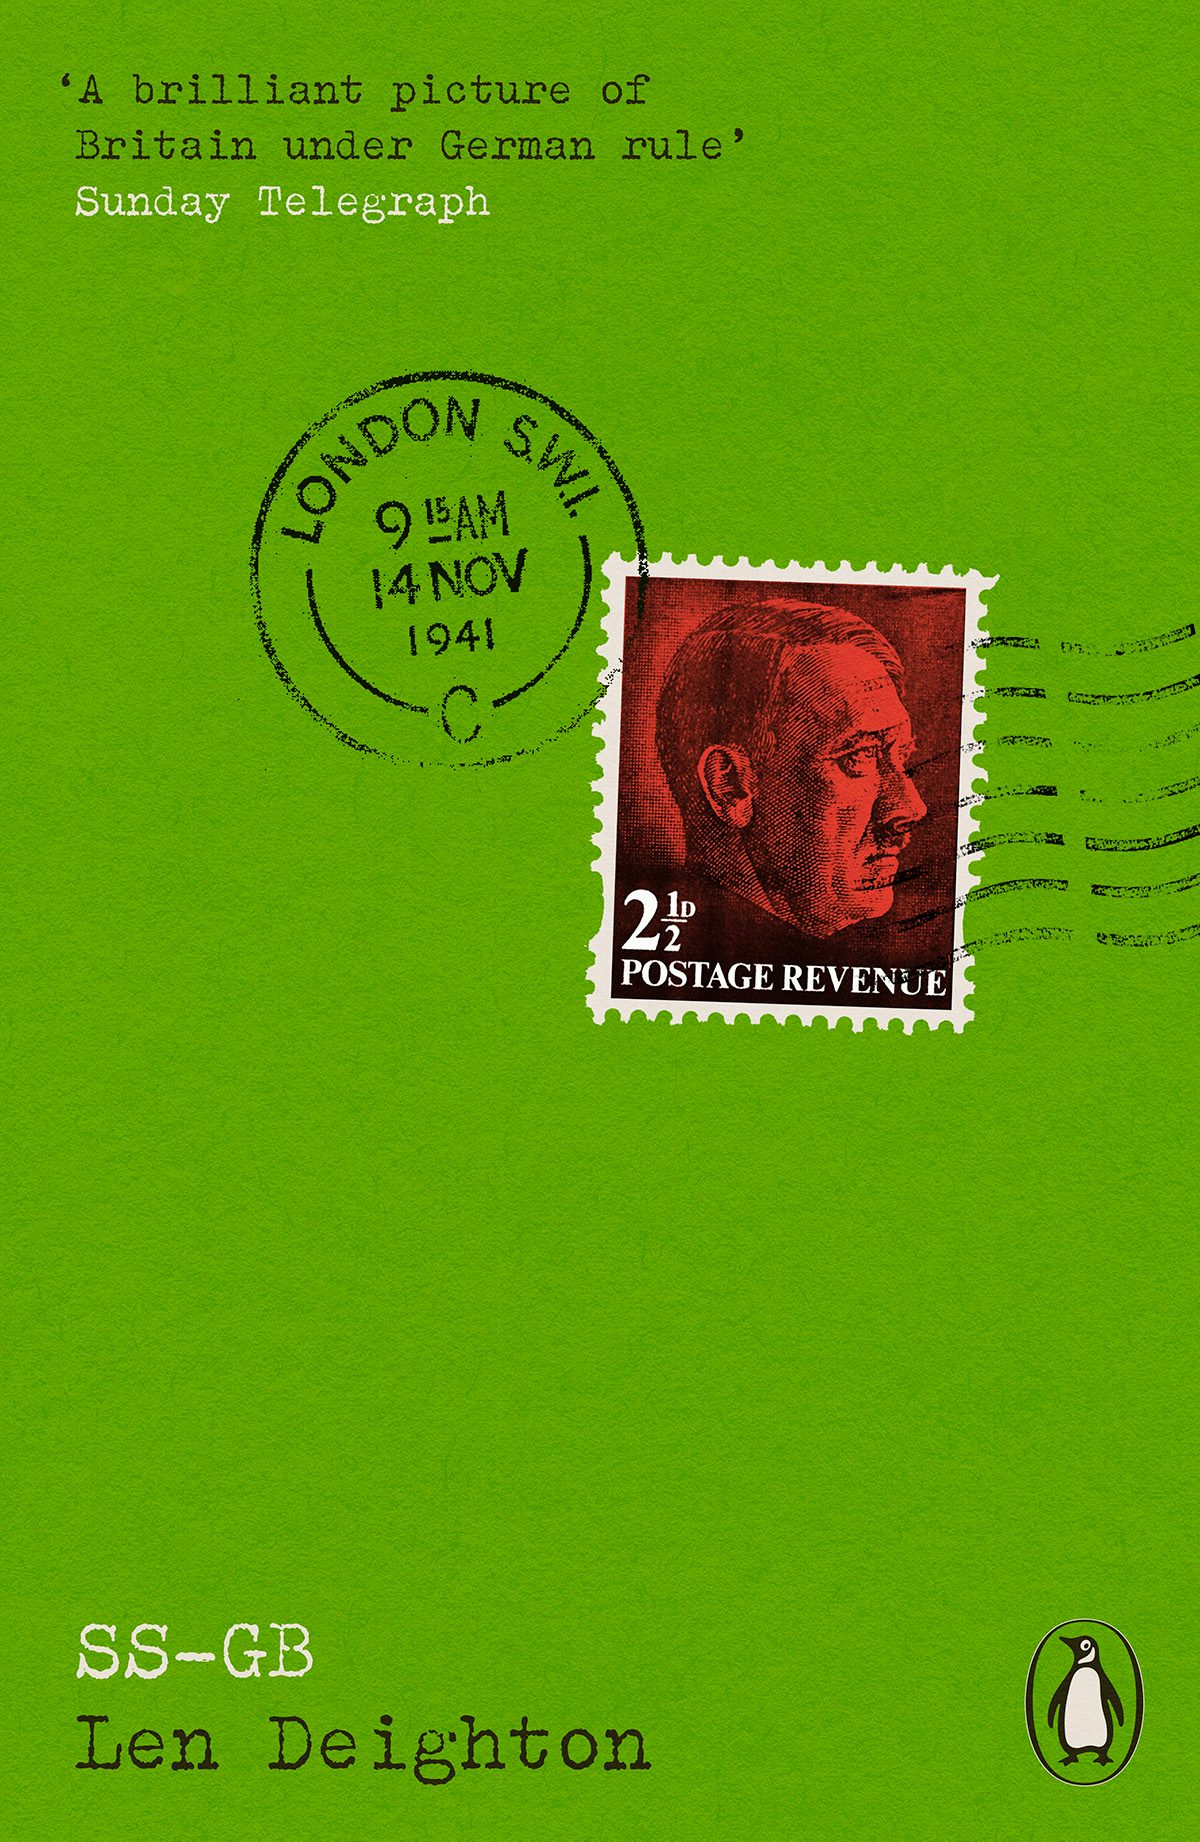 Image shows the cover of SS-GB from Penguin Modern Classics Crime and Espionage series, showing a vintage 2nd class stamp featuring a face overlaid in red, against a bright green background